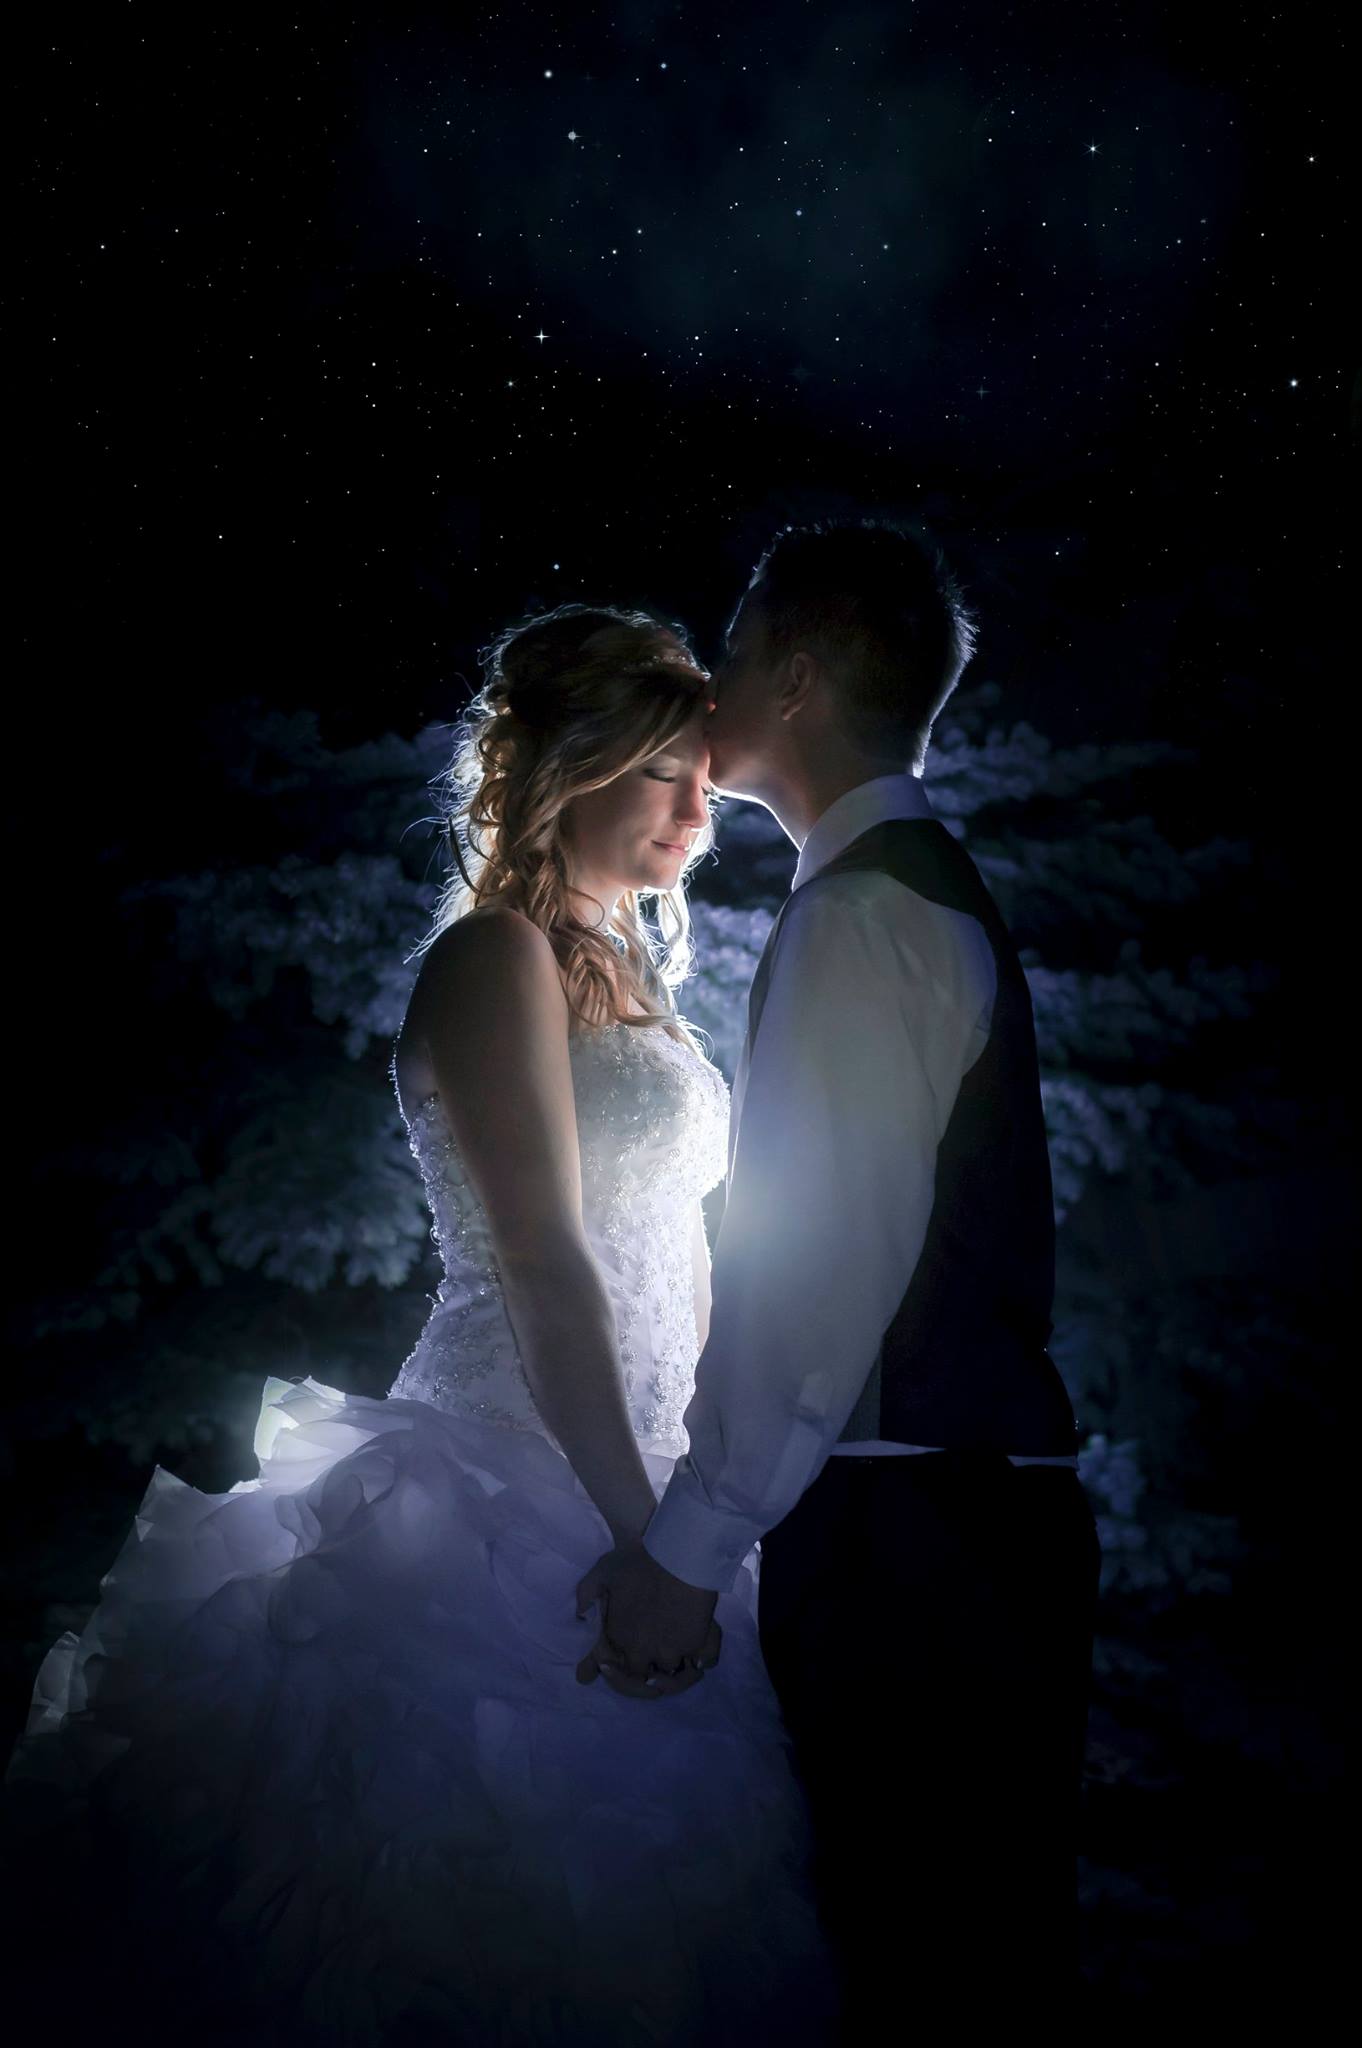 backlit photo of bride and groom at night under the stars (after wedding ceremony had ended) Amherstburg